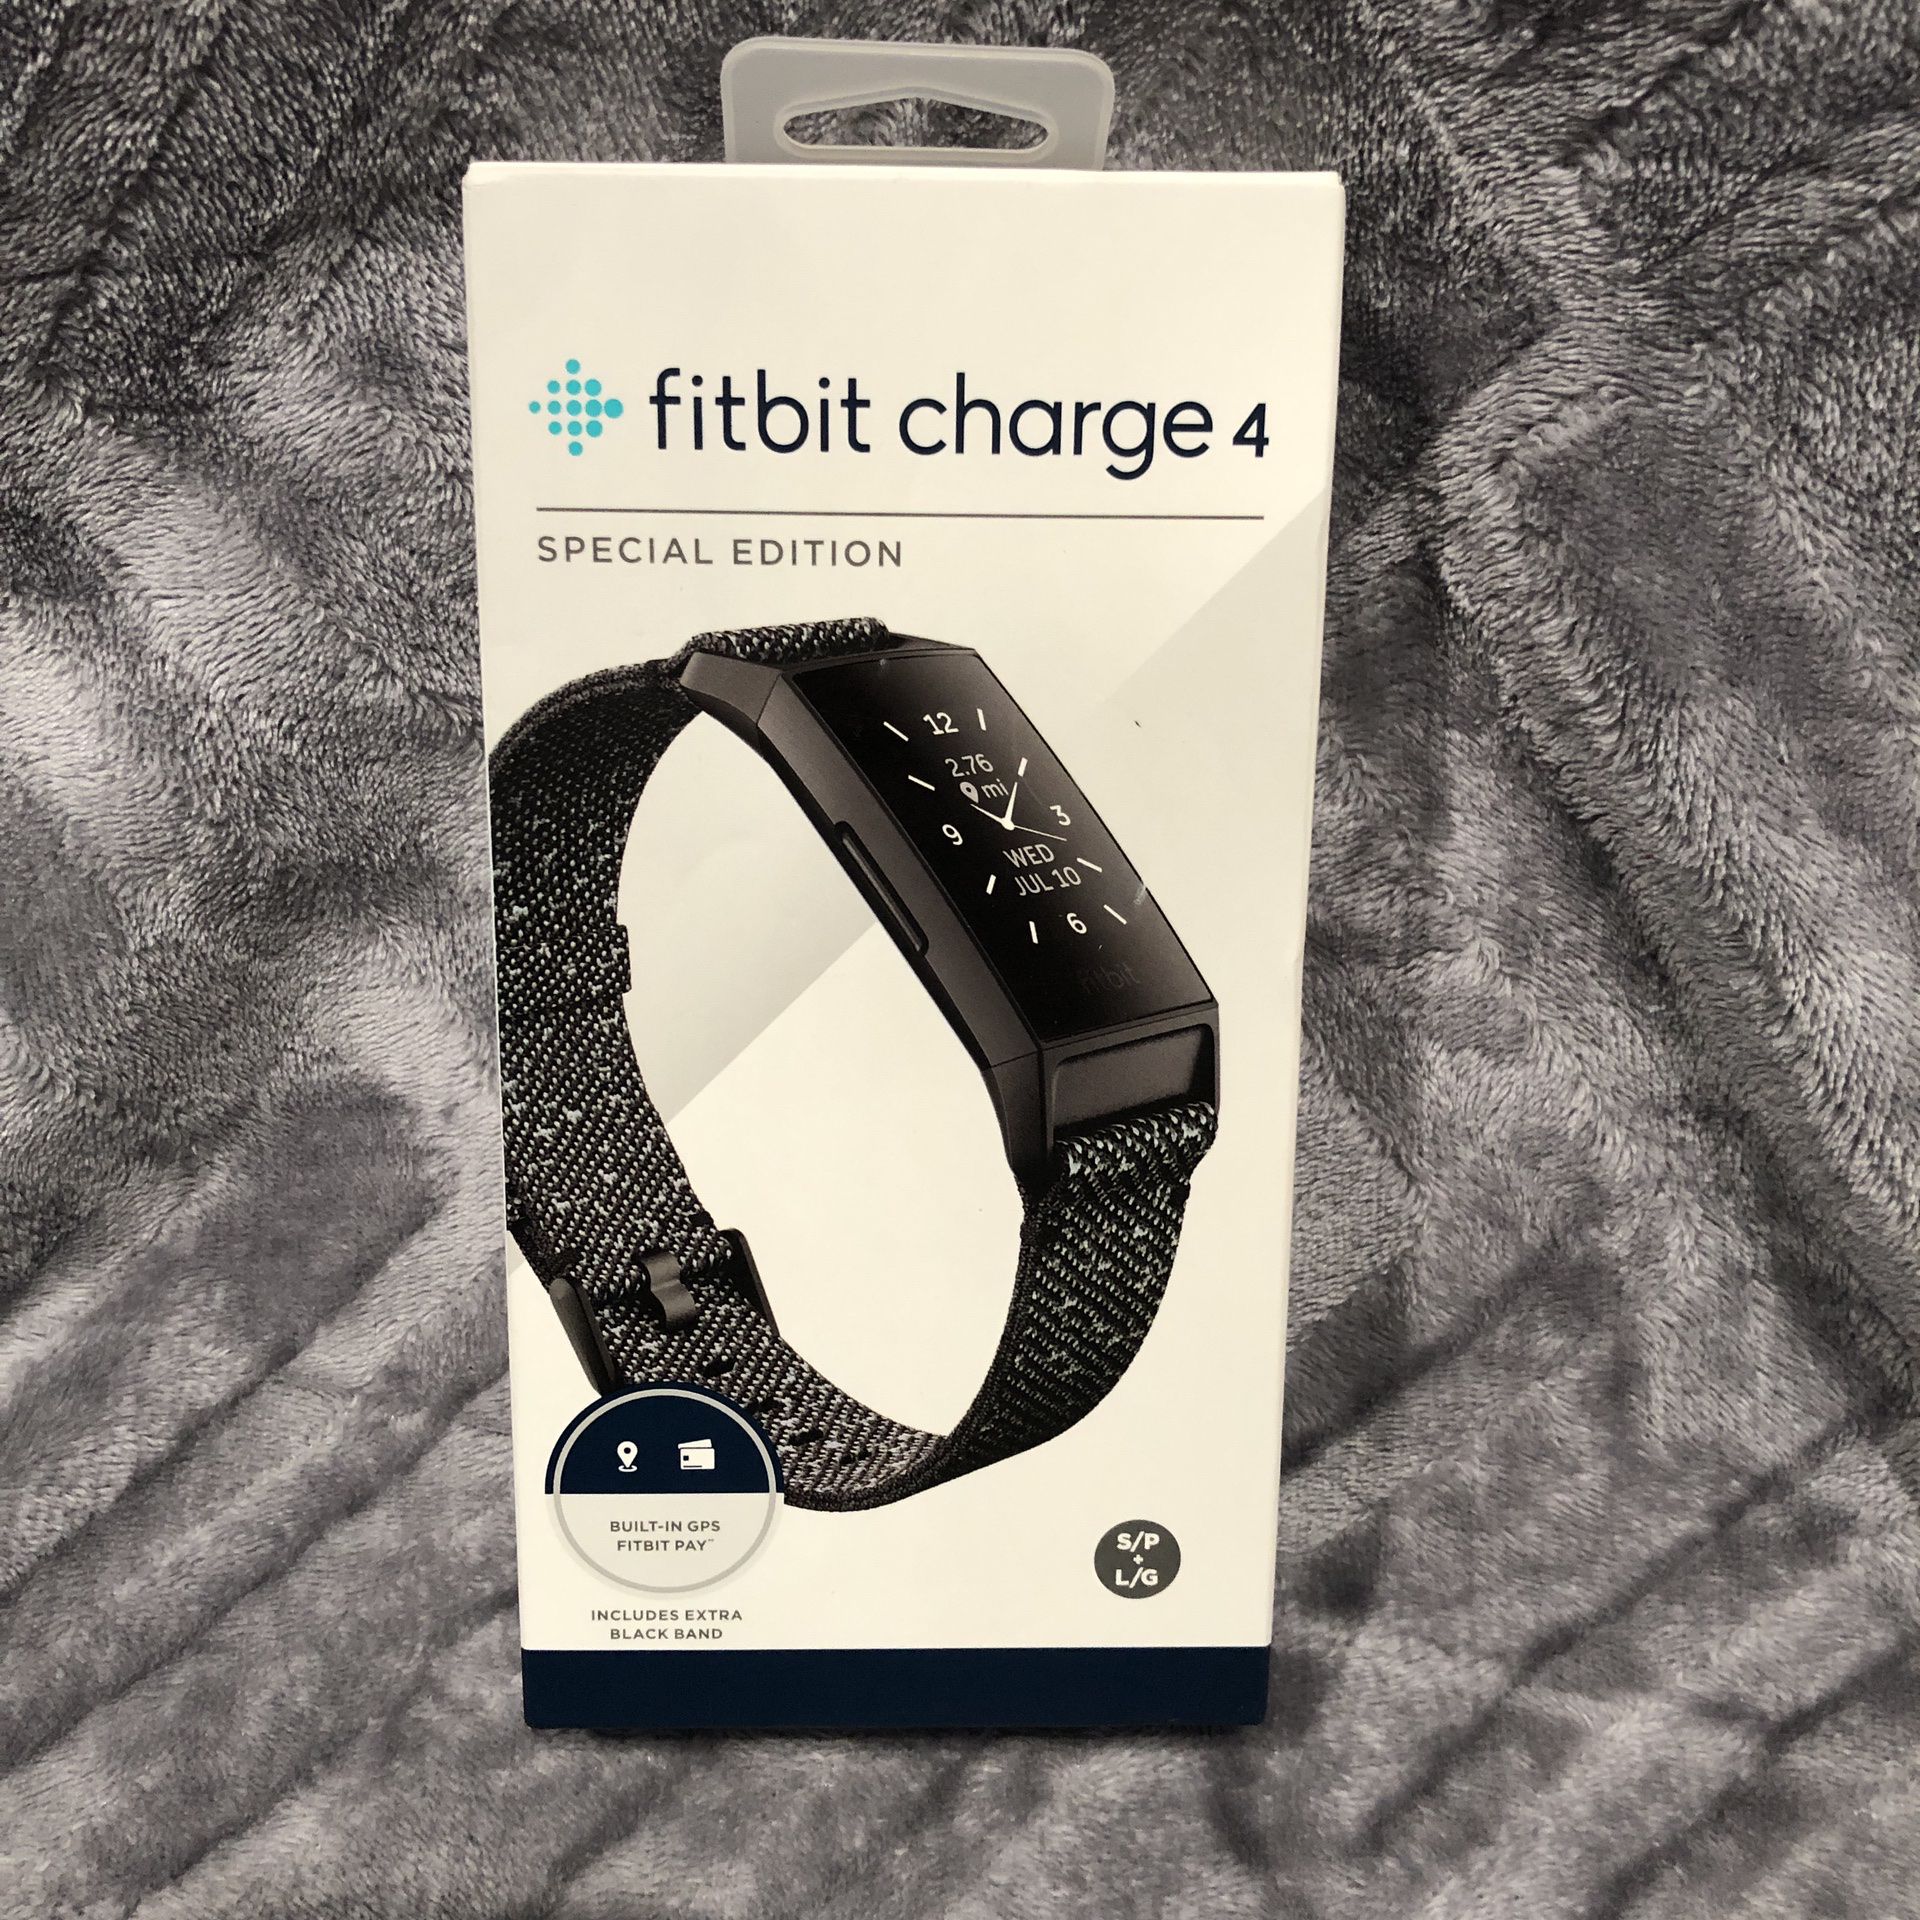 Brand New And Sealed. Fitbit Charge 4 Granite Reflective Woven Advanced Fitness Tracker